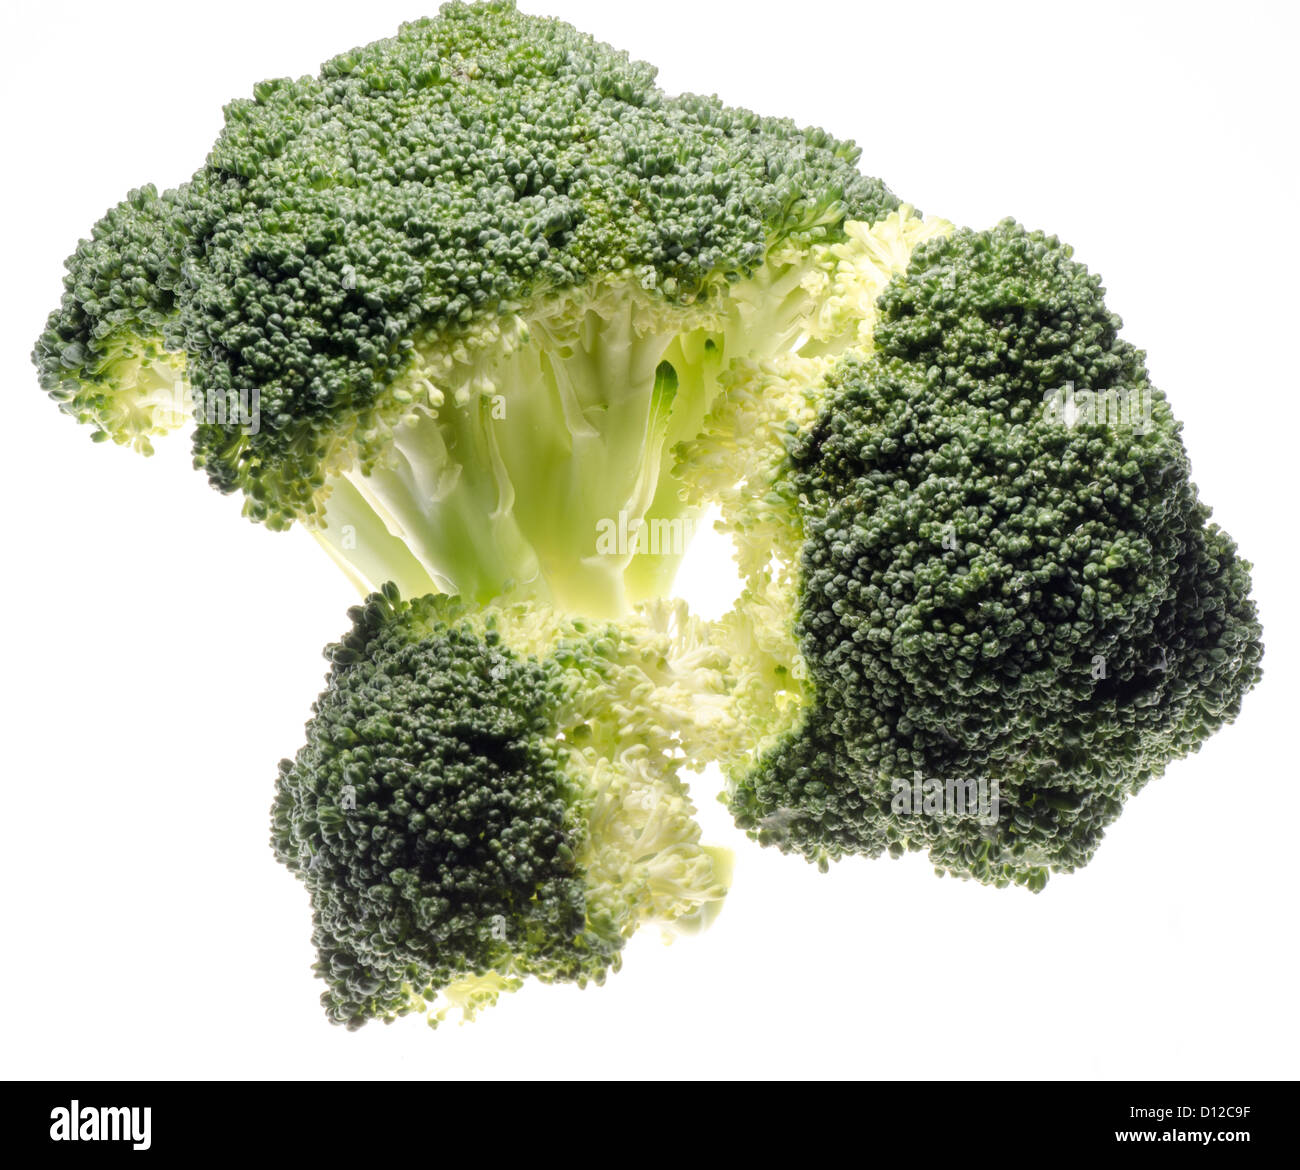 vegetable green broccoli isolated on white Stock Photo